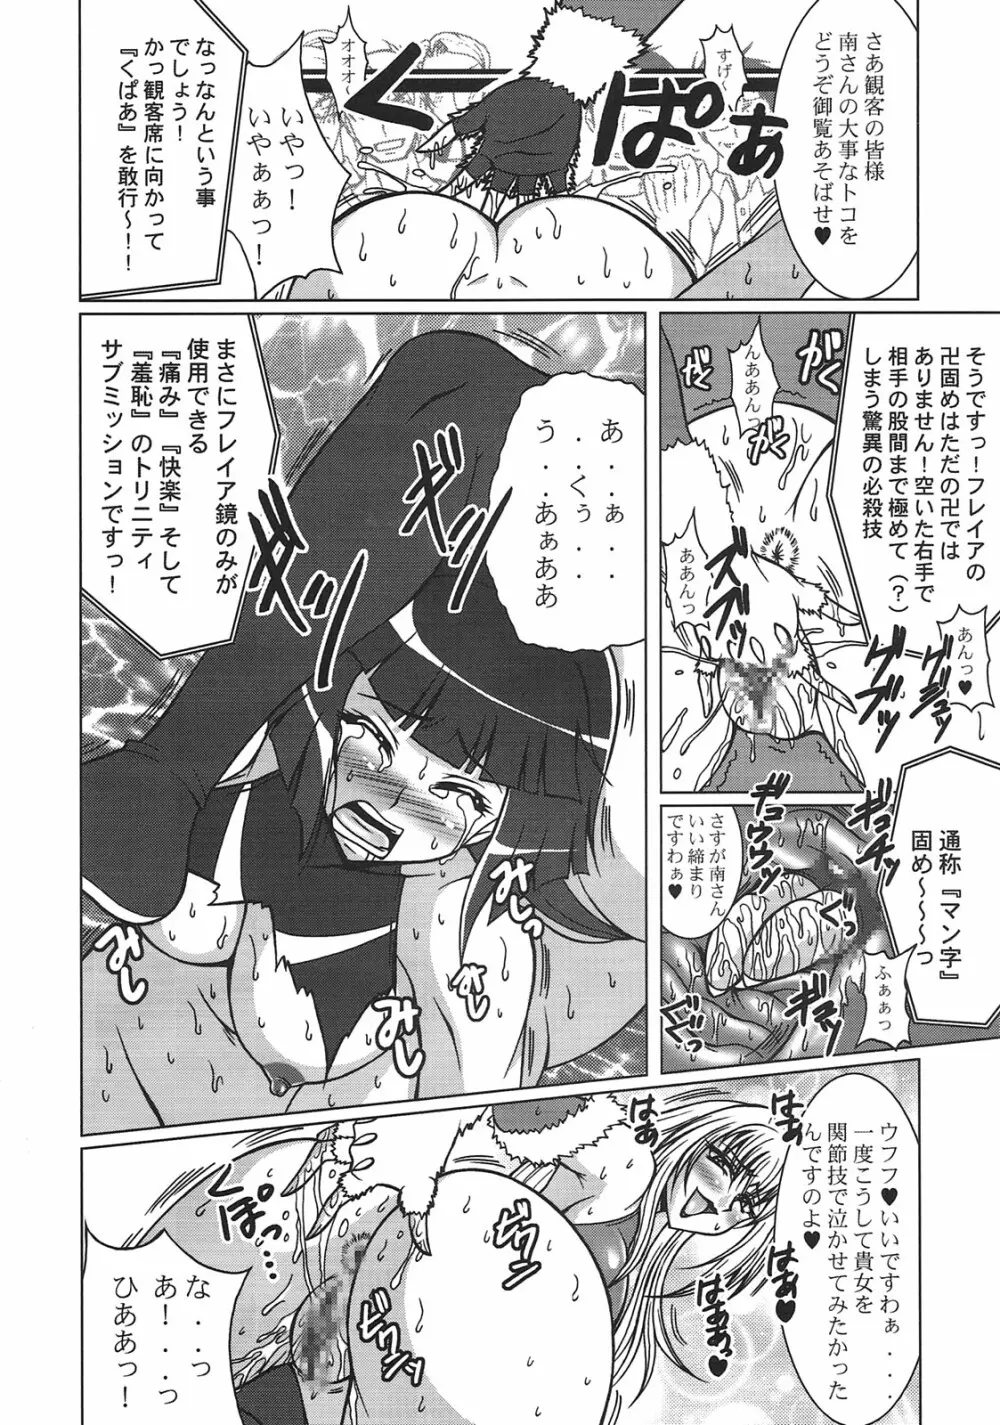 THE WRESTLE M@STER Page.15